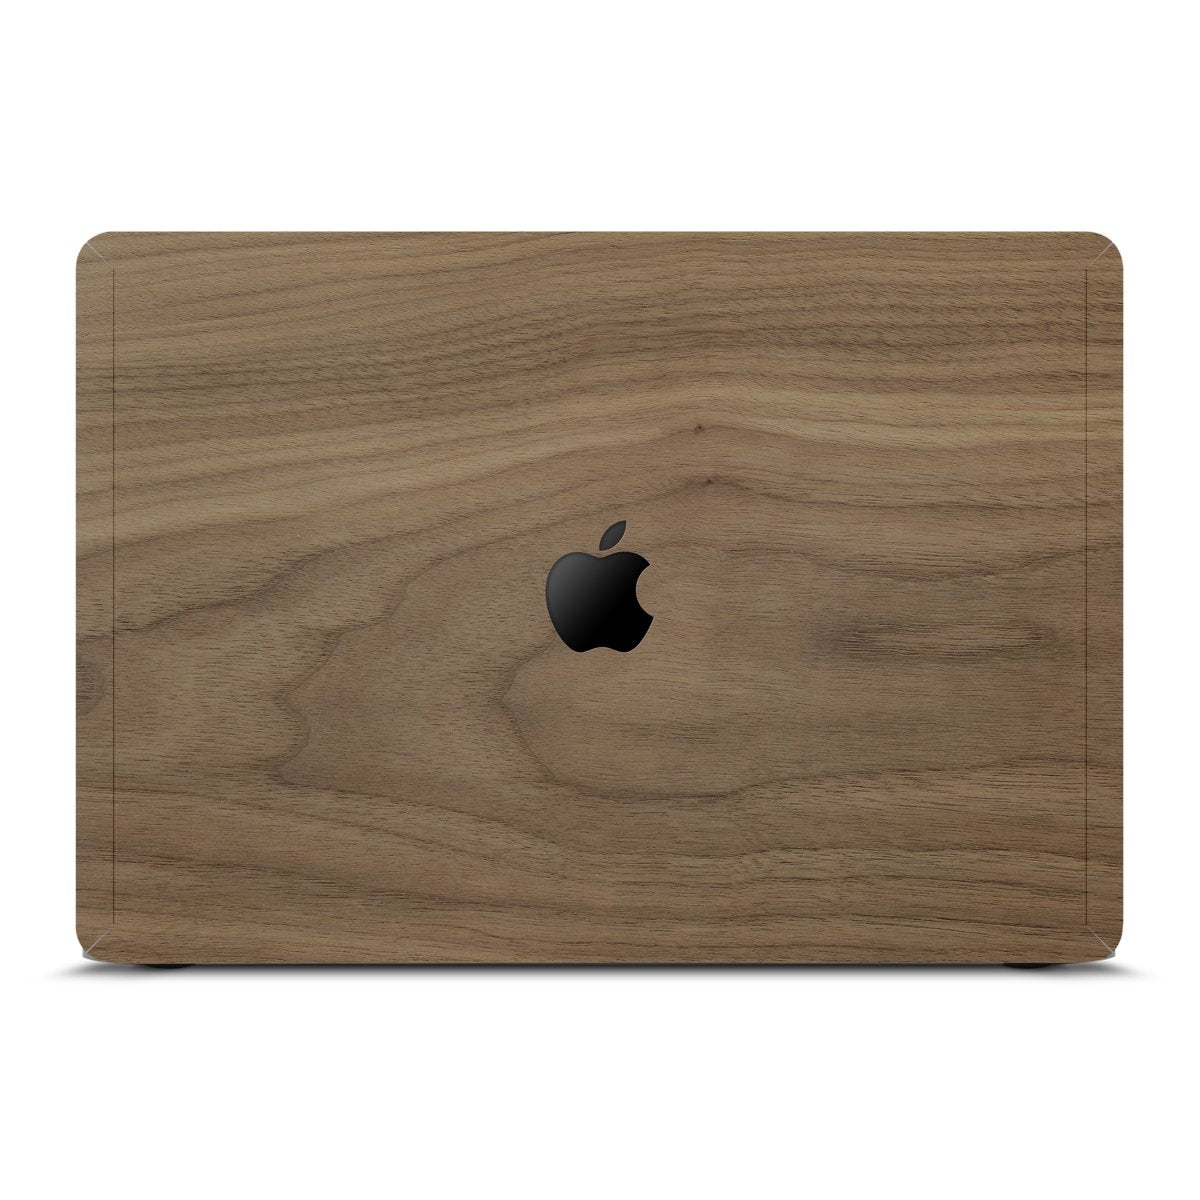 Wooden Skin for MacBook 🌳 Natural Wood. ♻️ Eco-friendly. ✈️ Free Worldwide Shipping. 🎁 Perfect Gift.